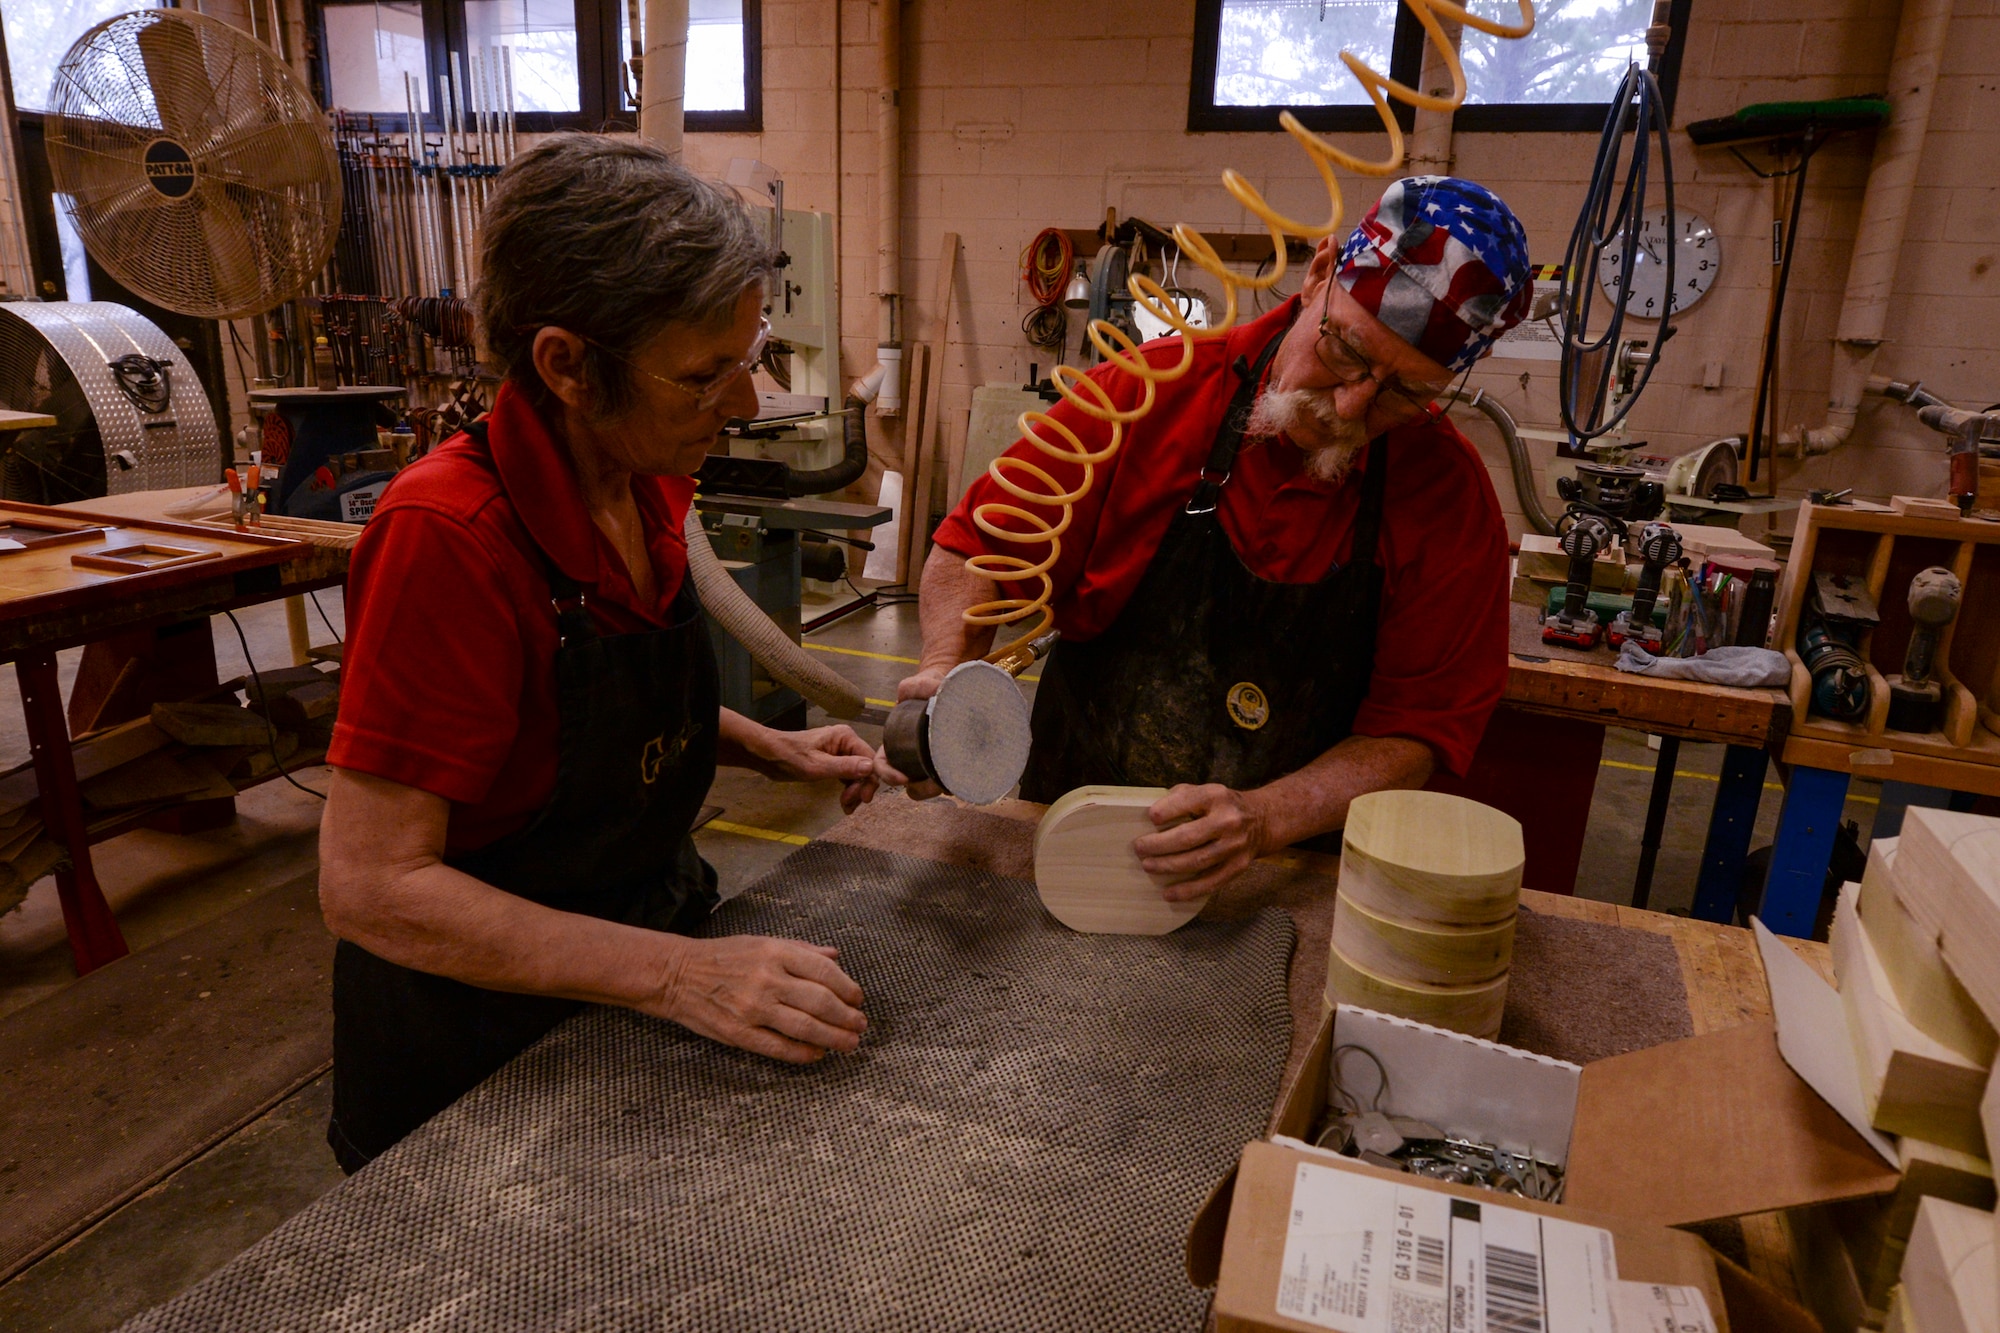 John Fischbach Sr., 23d Force Support Squadron recreation aide and Gail Fischbach, 23d FSS volunteer, sand woodblocks Jan. 15, 2016, at Moody Air Force Base, Ga. Gail and John work in the Woodshop, and enjoy making masterpieces for the local community. (U.S. Air Force photo by Airman 1st Class Janiqua P. Robinson/Released)